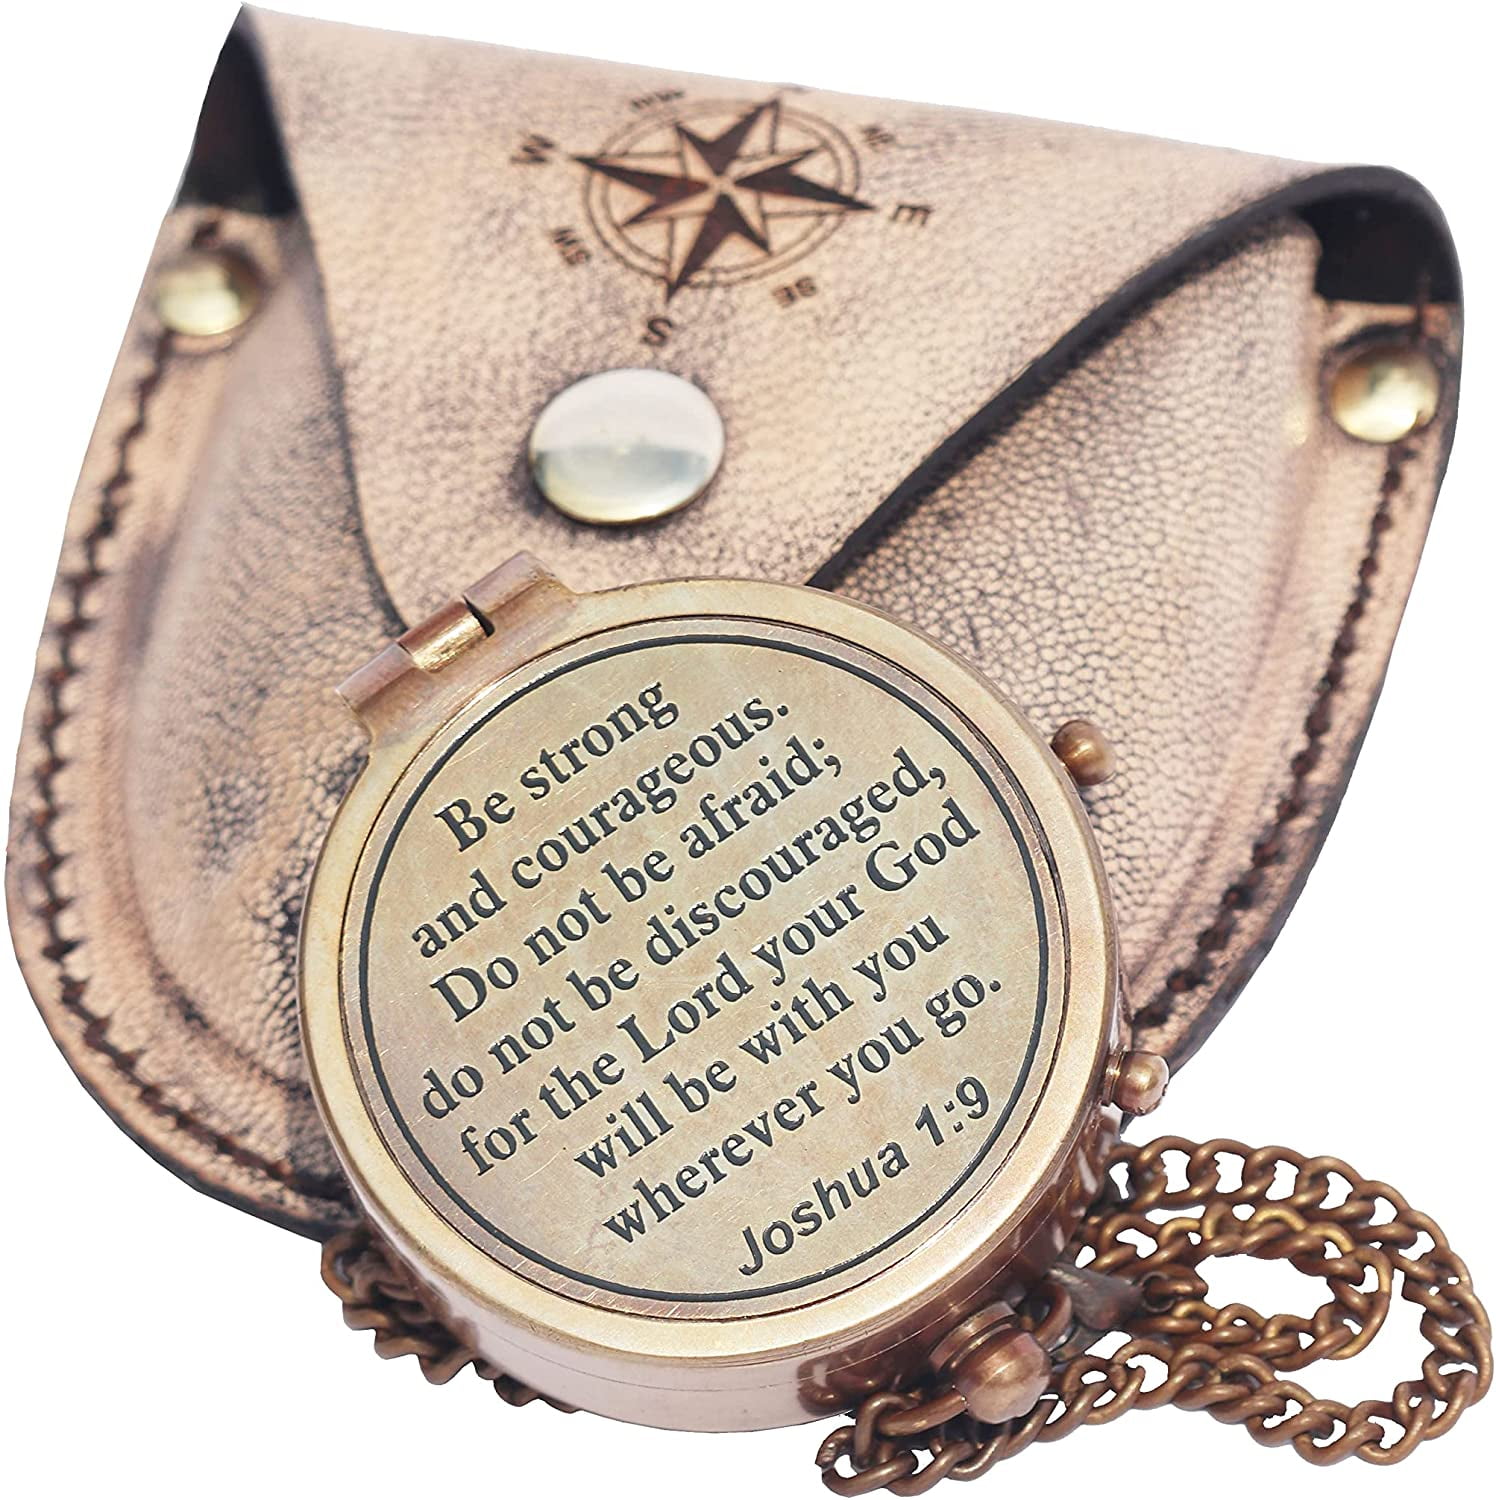 Baptism Gifts Engraved Compass with Wood Box,Jeremiah 29 11 Gift for Him 